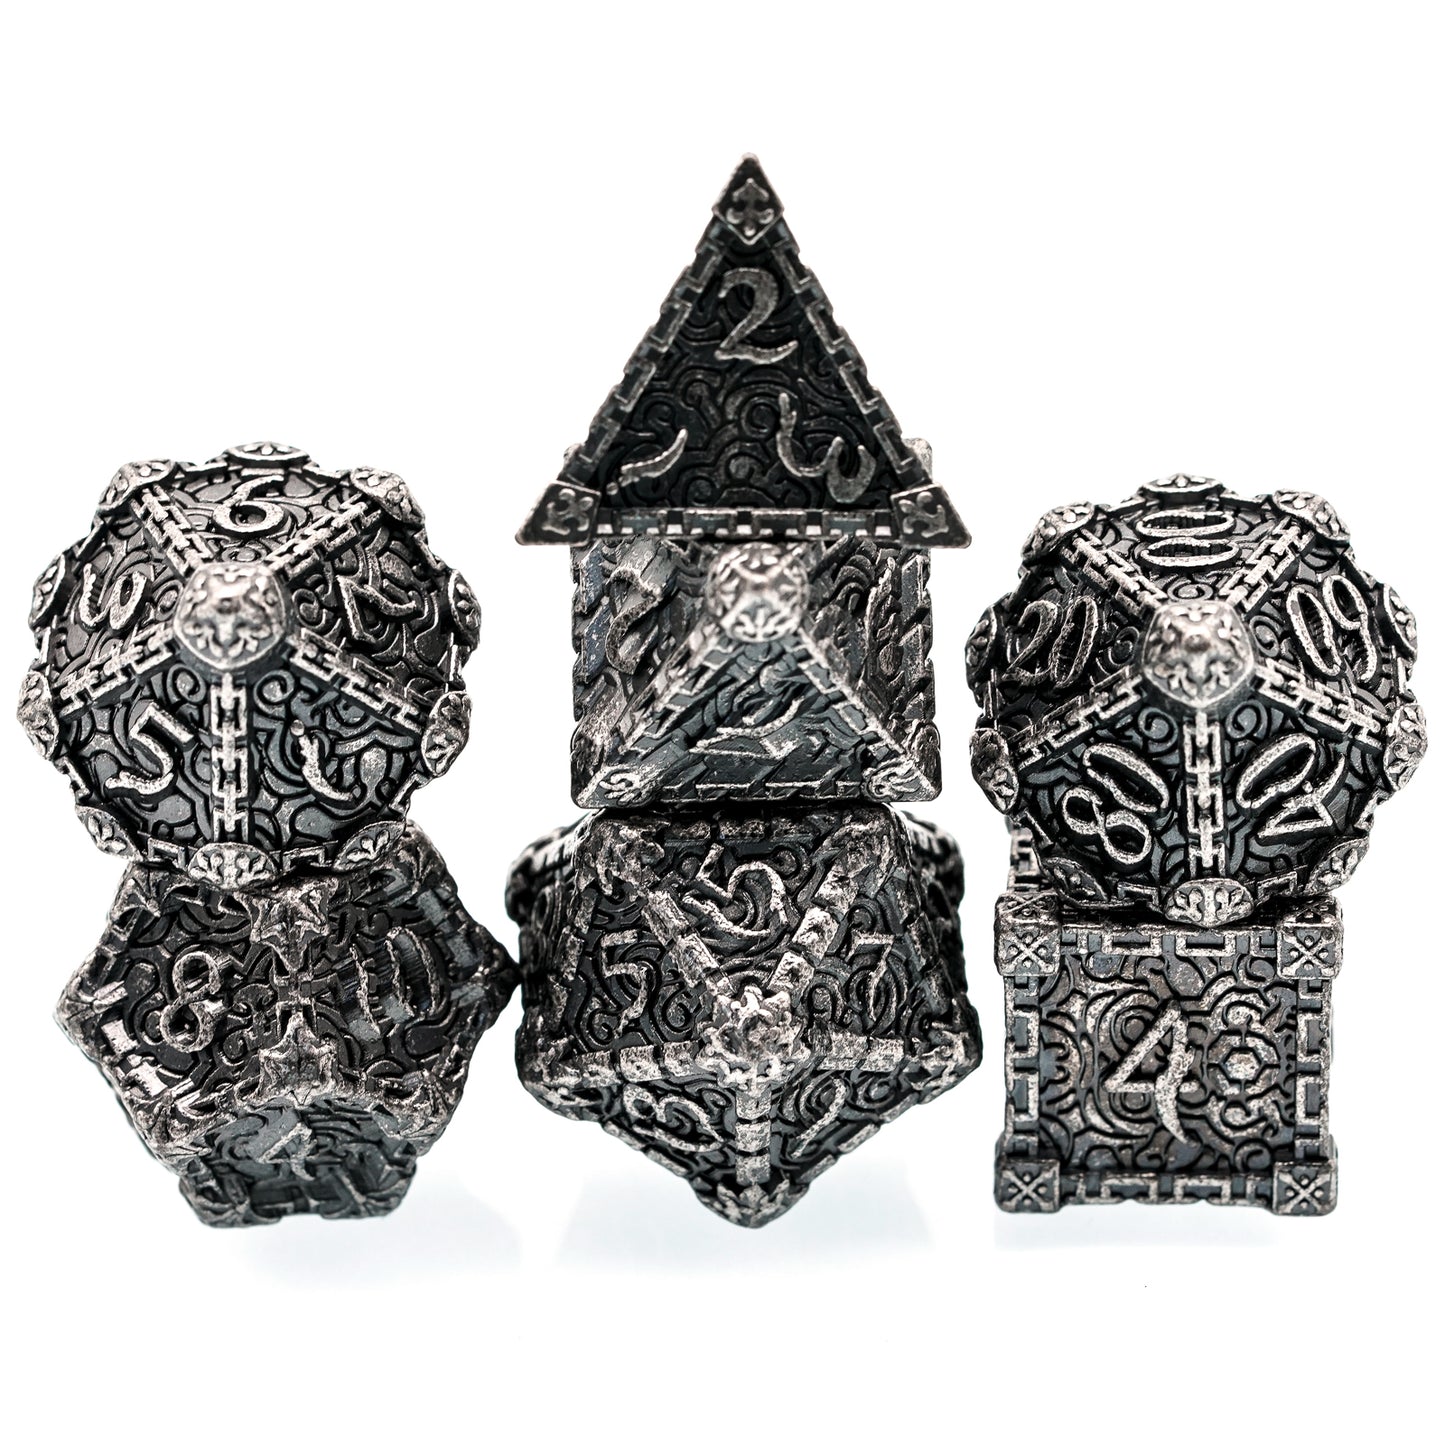 Silver Blade, metal dagger dice set, 7 pieces on white background